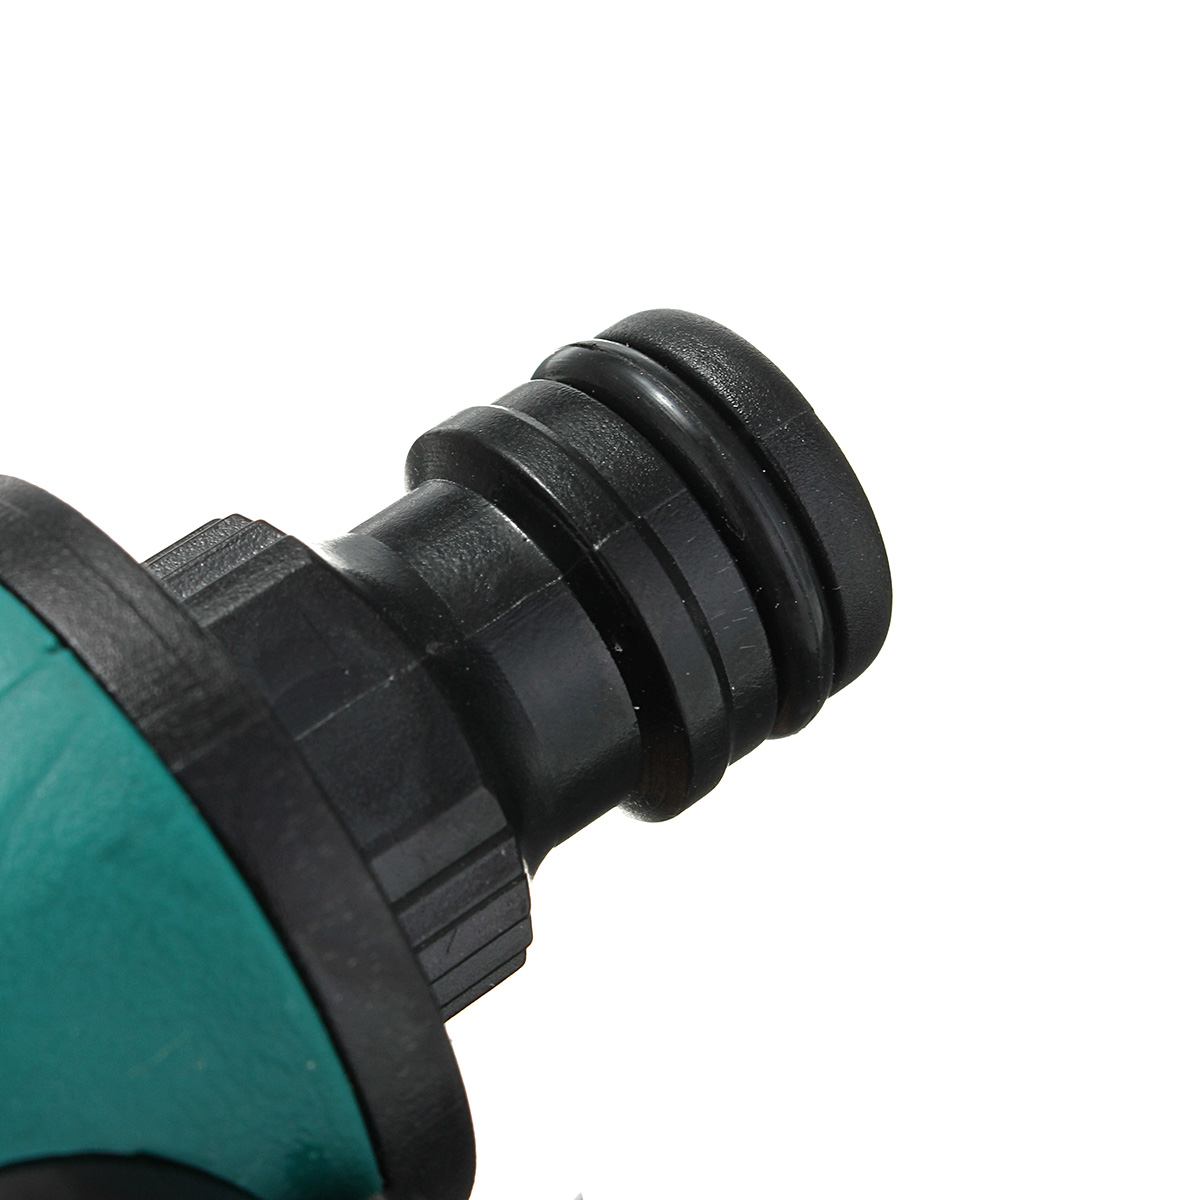 Garden-Hose-Tap-Pipe-Compatible-12-2-Way-Connector-Valve-Convertor-Fitting-Adapter-Tool-1290232-8